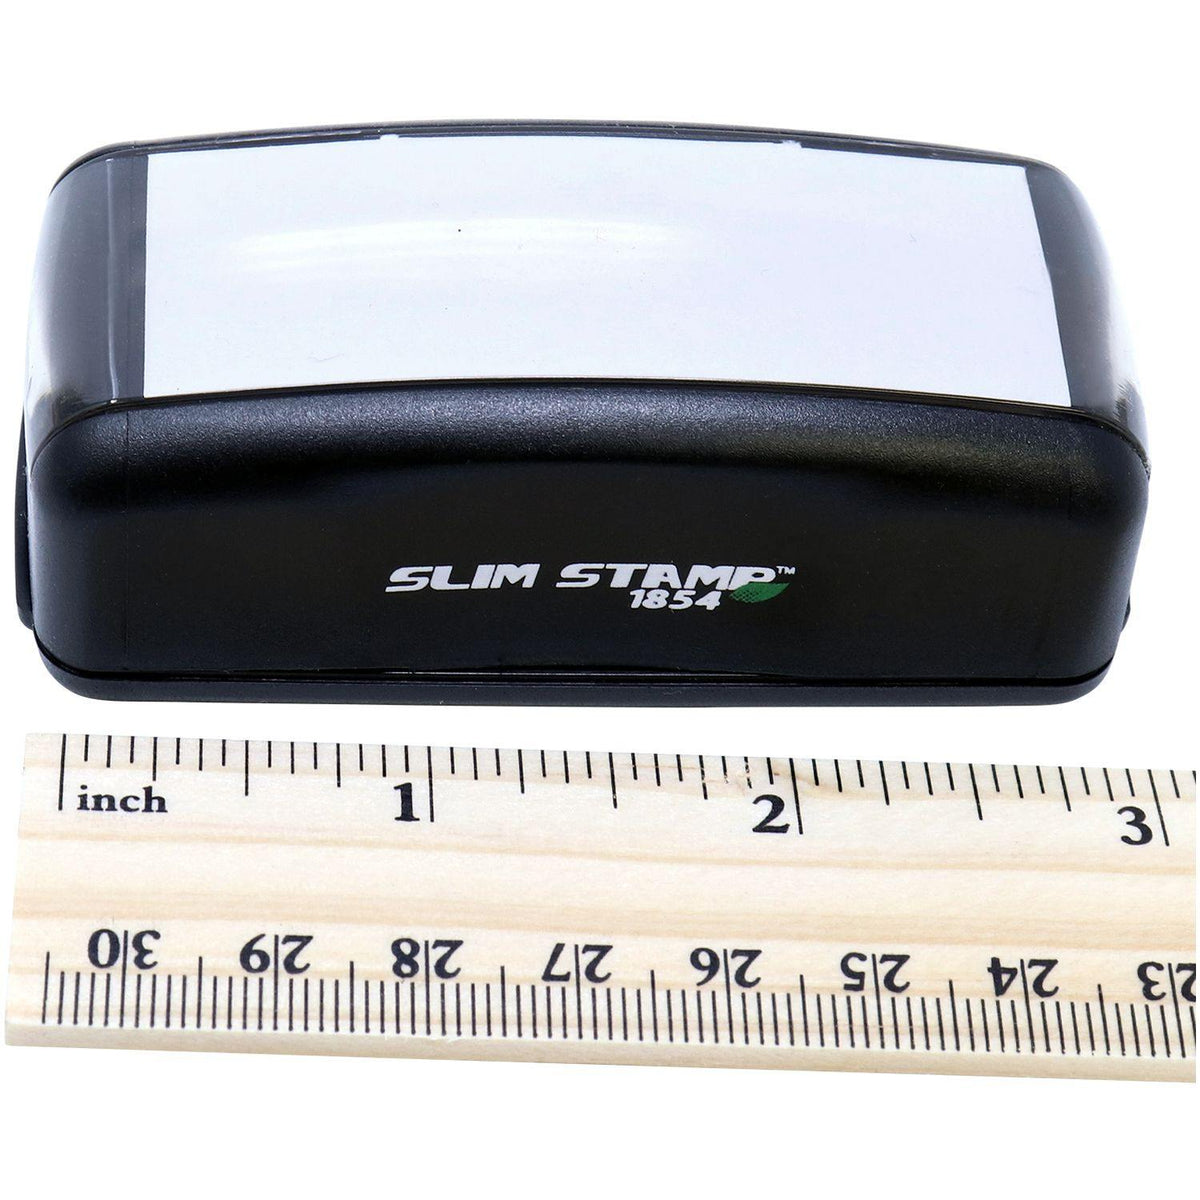 Measurement Large Pre-Inked Certificada Stamp with Ruler